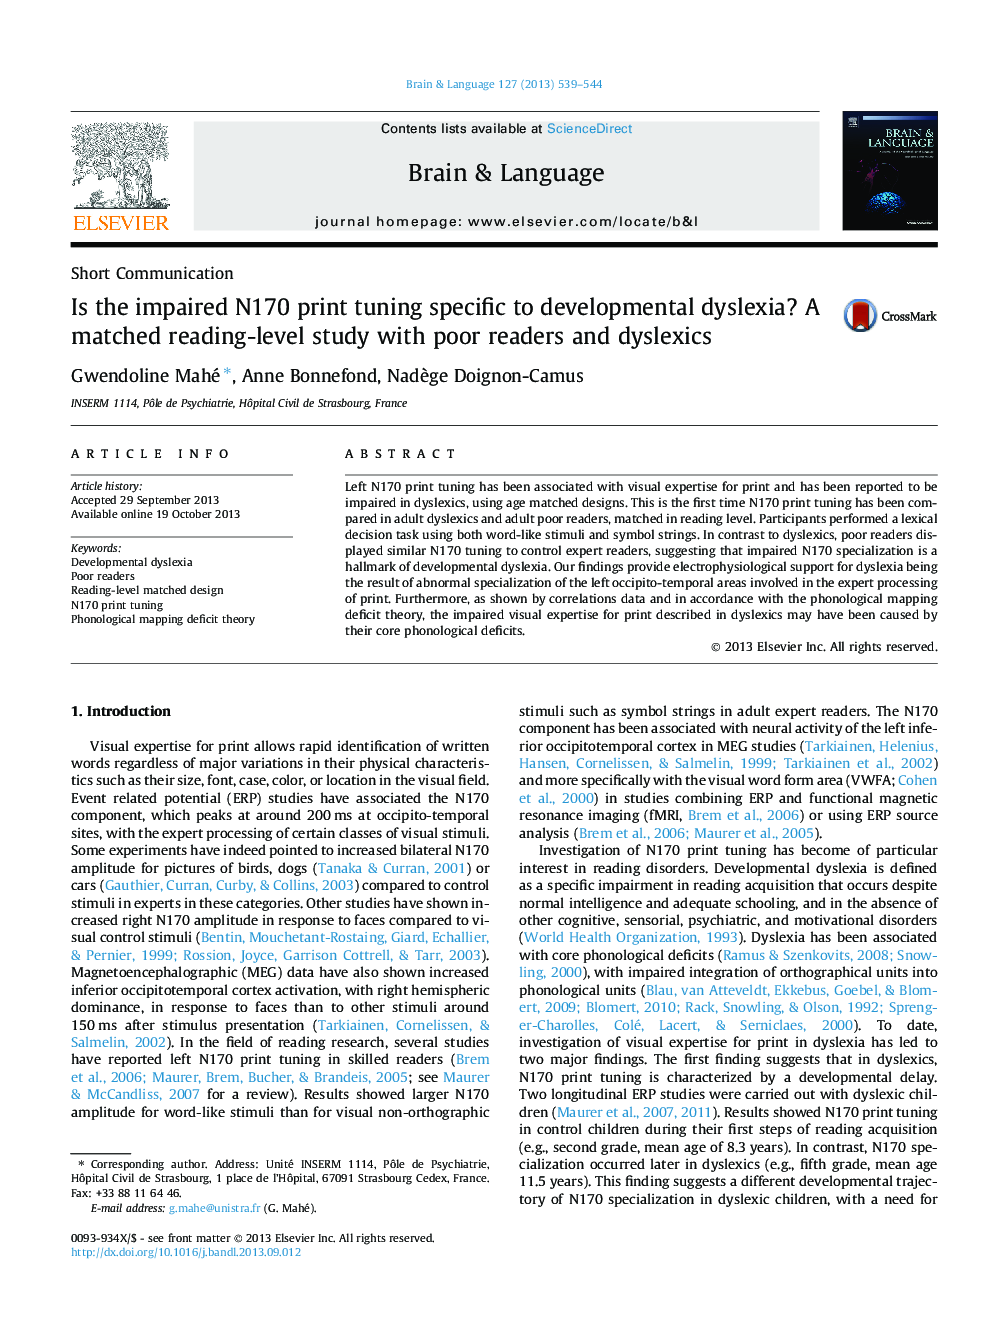 Is the impaired N170 print tuning specific to developmental dyslexia? A matched reading-level study with poor readers and dyslexics